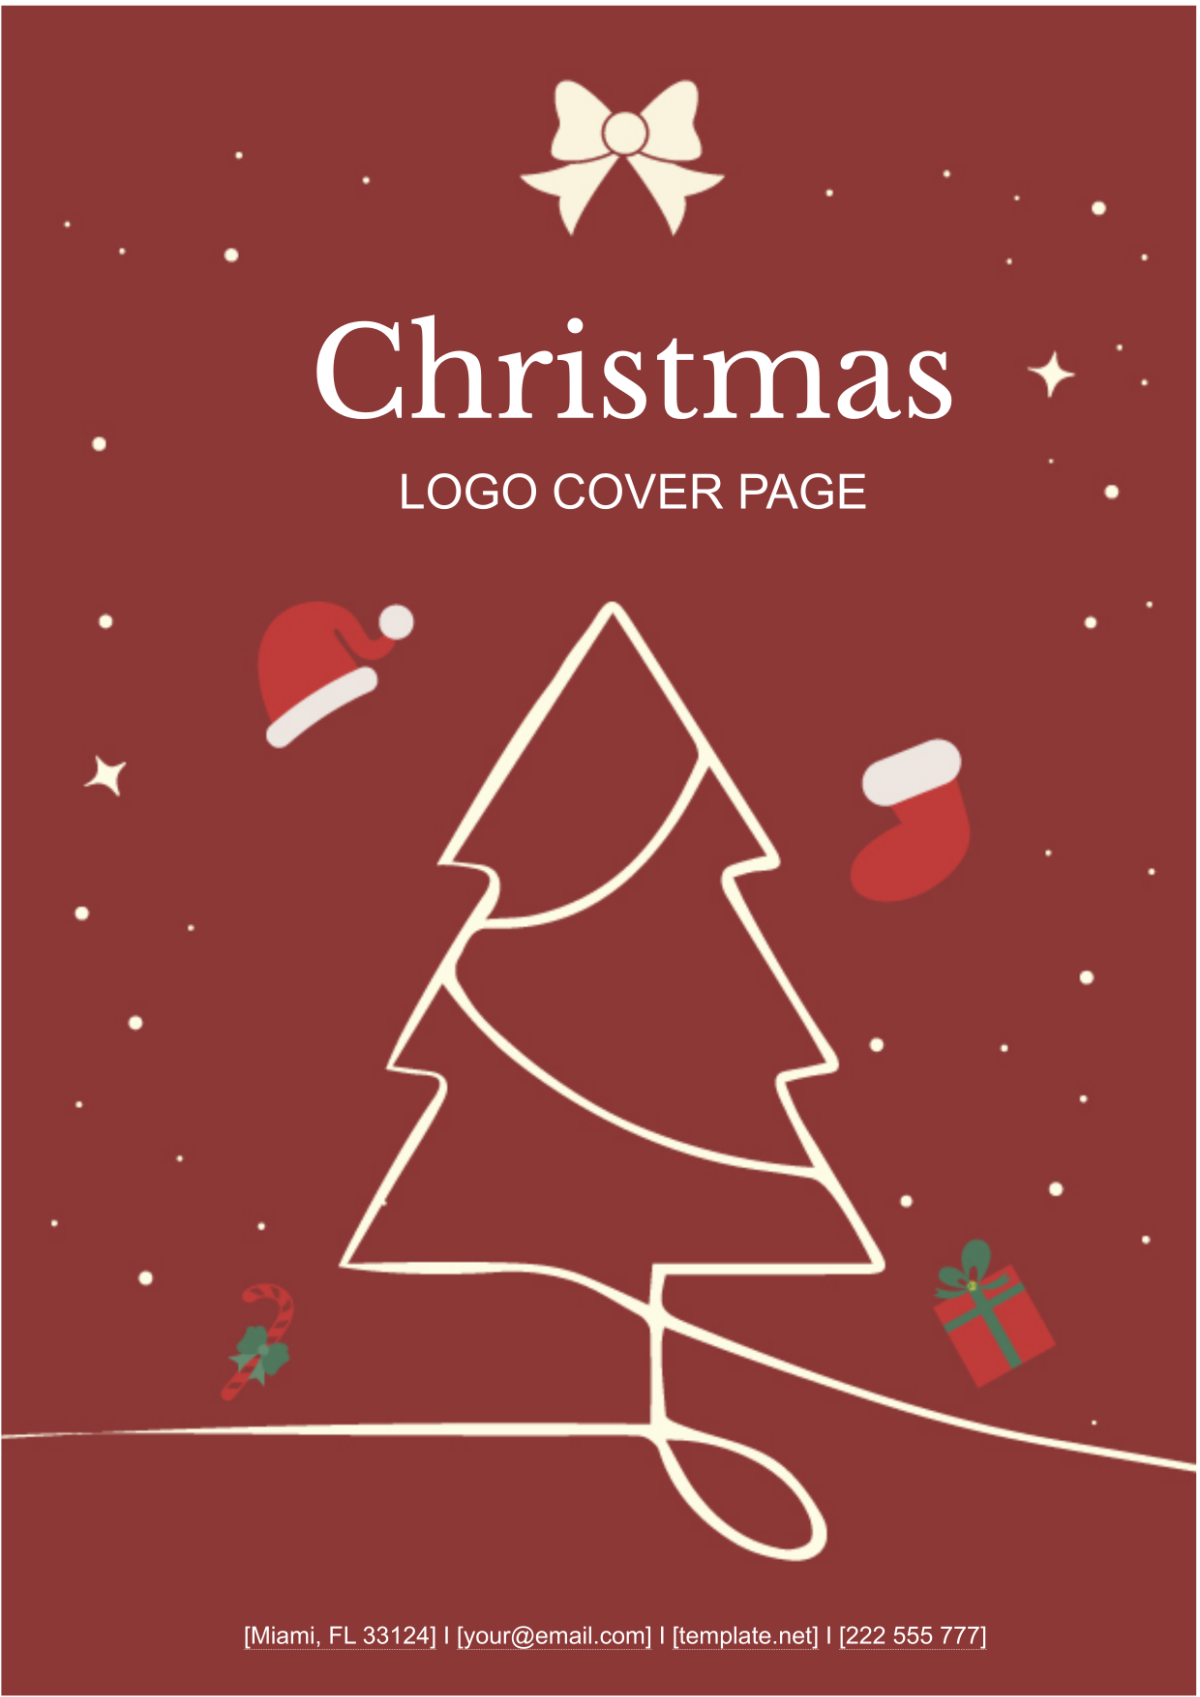 Christmas Cover Page Template